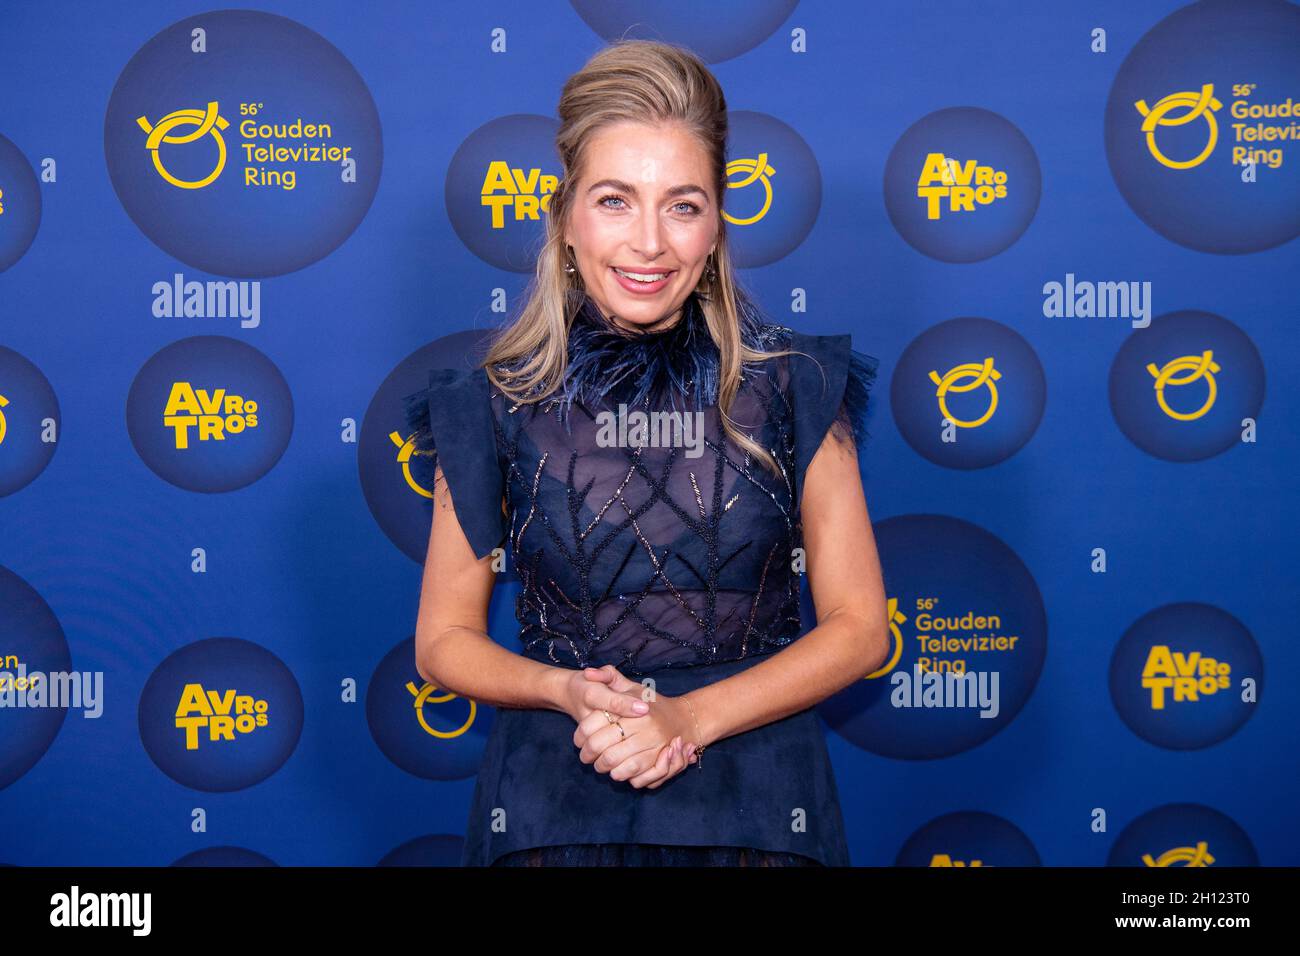 Shelly Sterk attending the 56th Televizier-Ring Gala at Carre Royal Theater  in Amsterdam. (Photo by DPPA/Sipa USA Stock Photo - Alamy